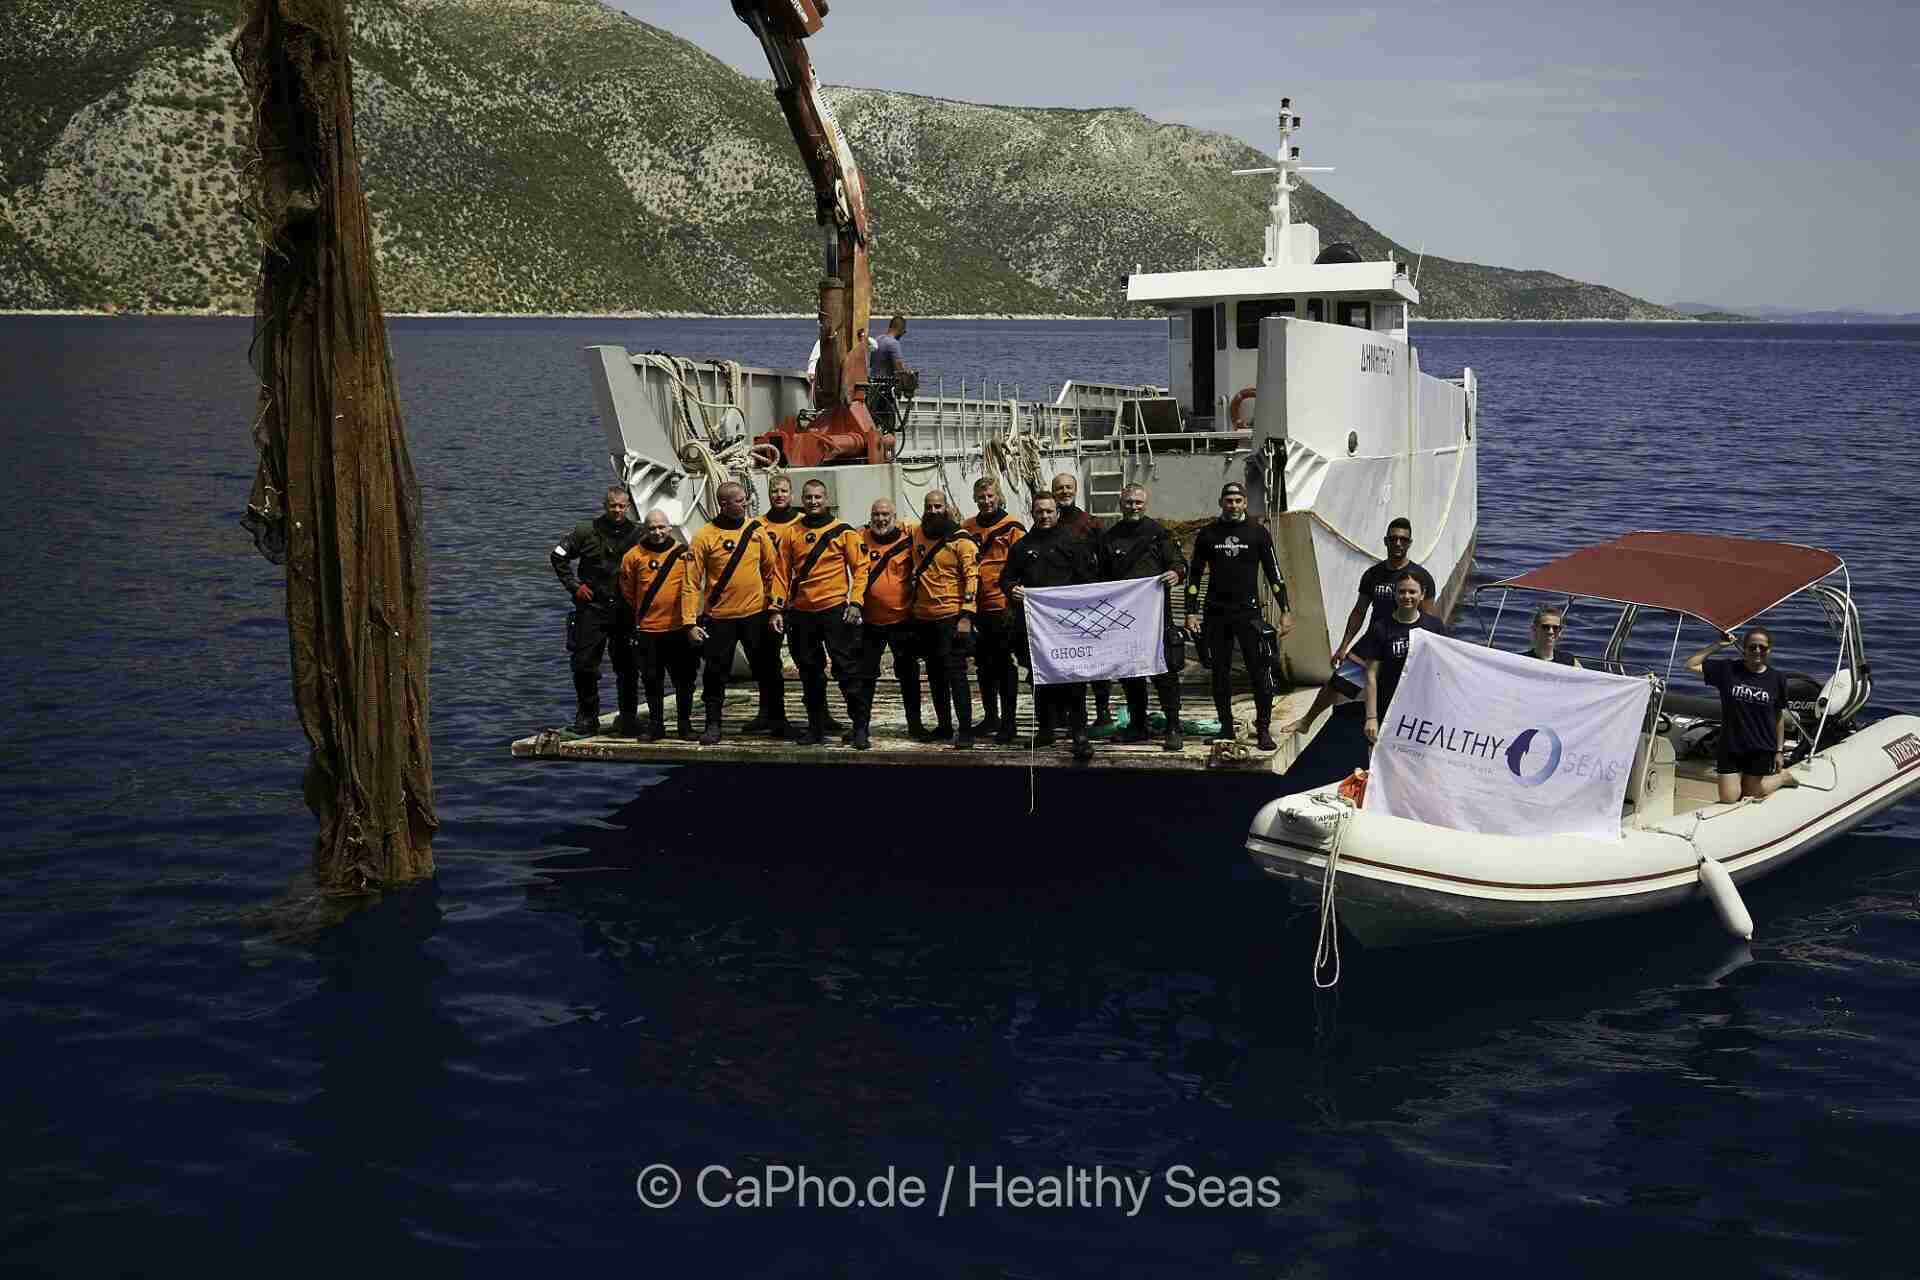 Healthy Seas documentary “Journey to Ithaca” wins award at Cannes World Film Festival